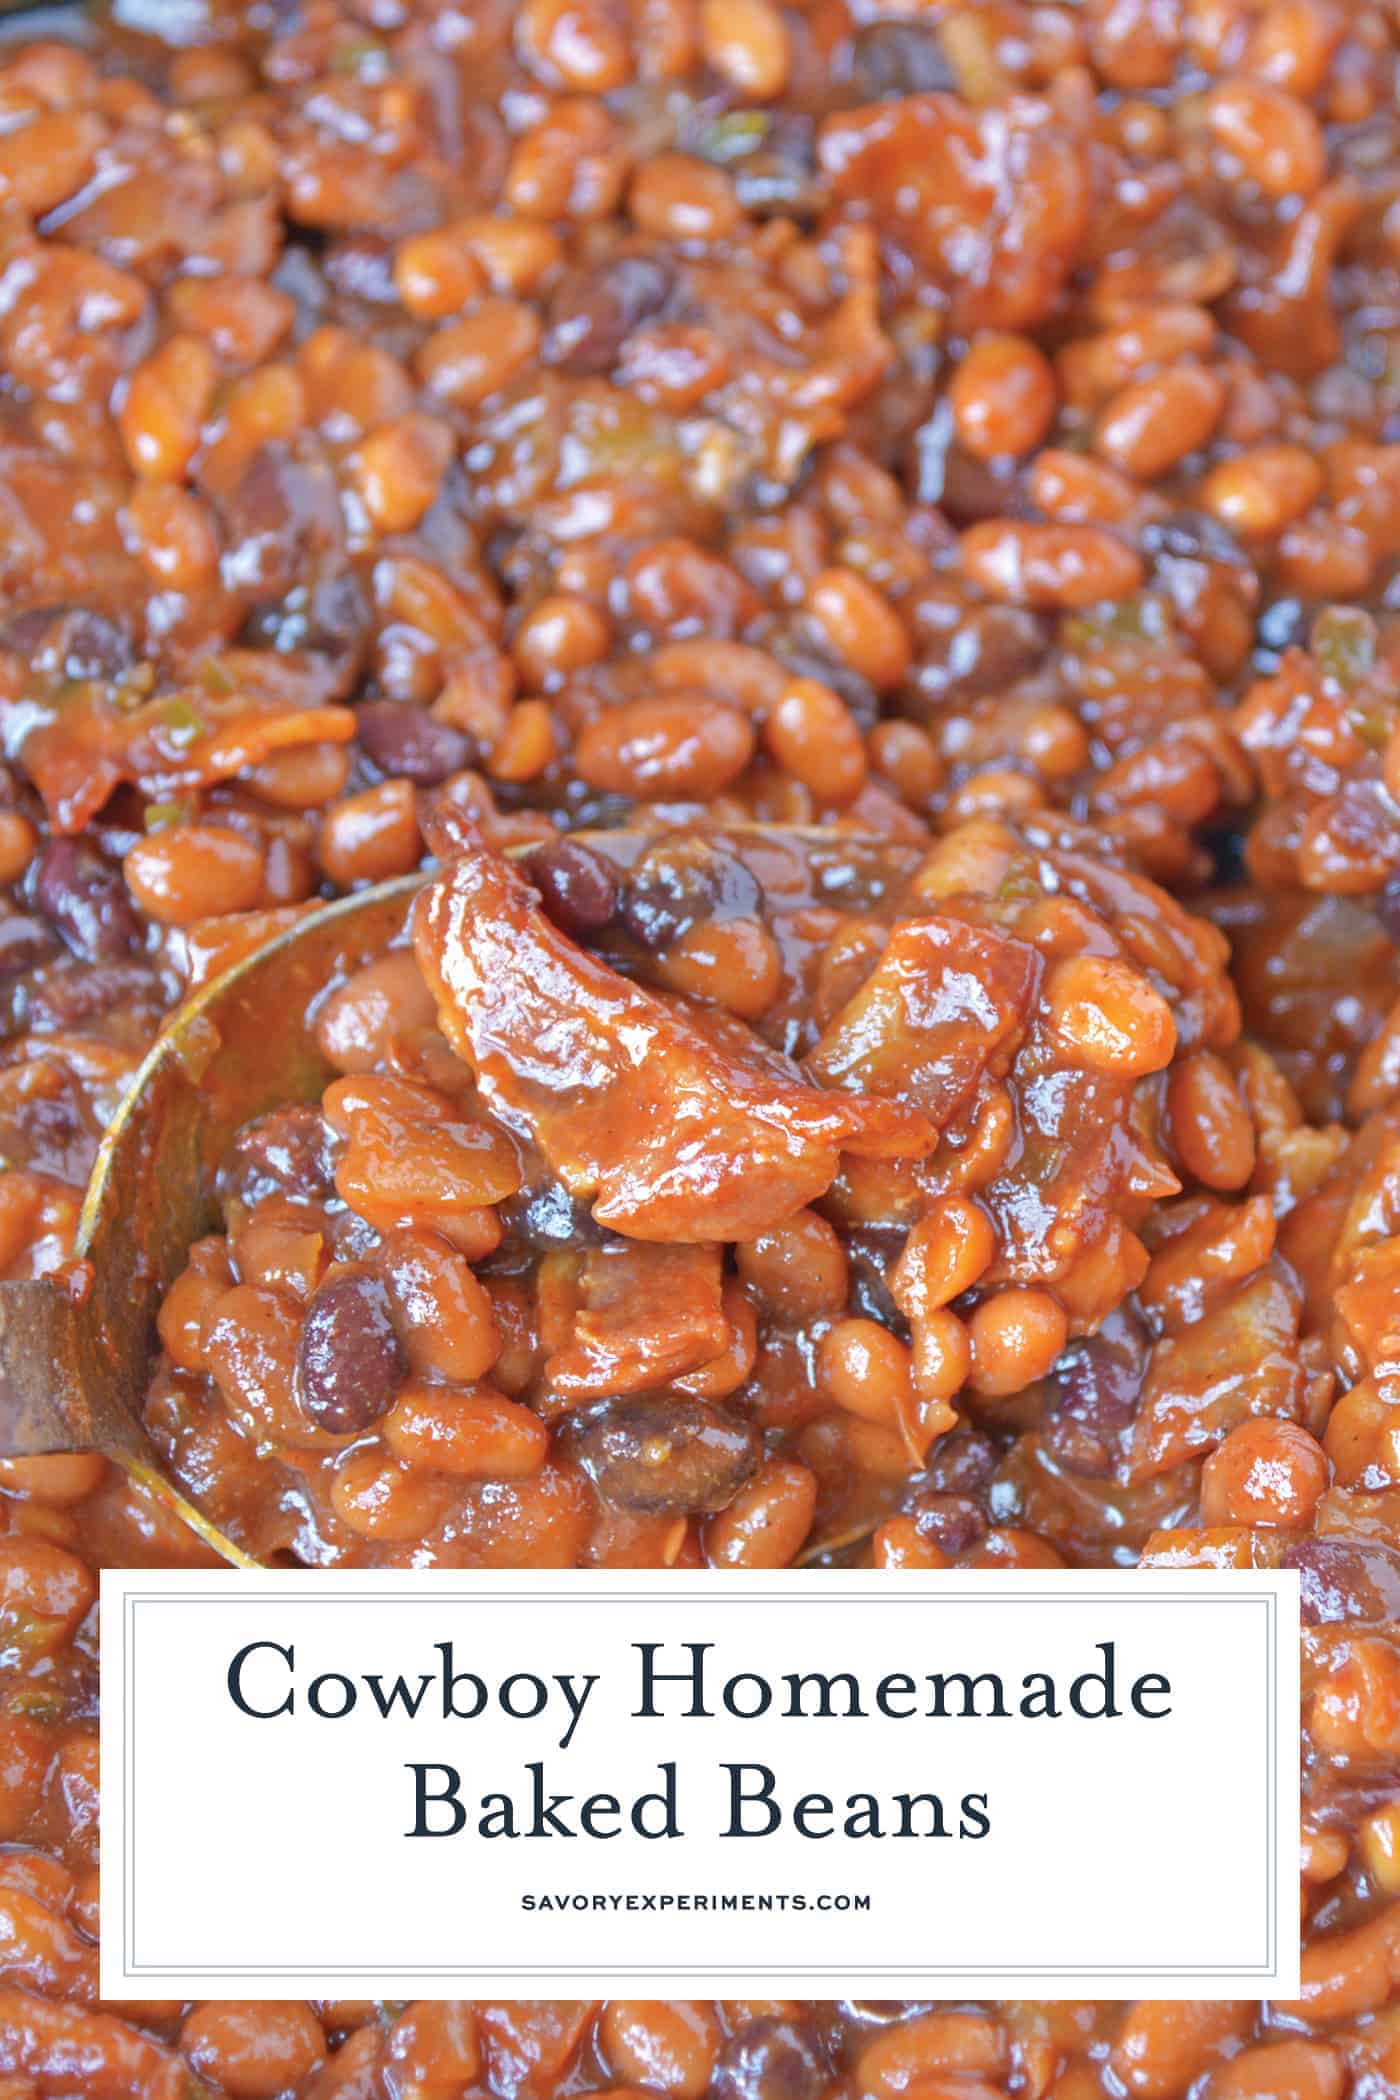 Cowboy Homemade Baked Beans - Baked Beans with Bacon!